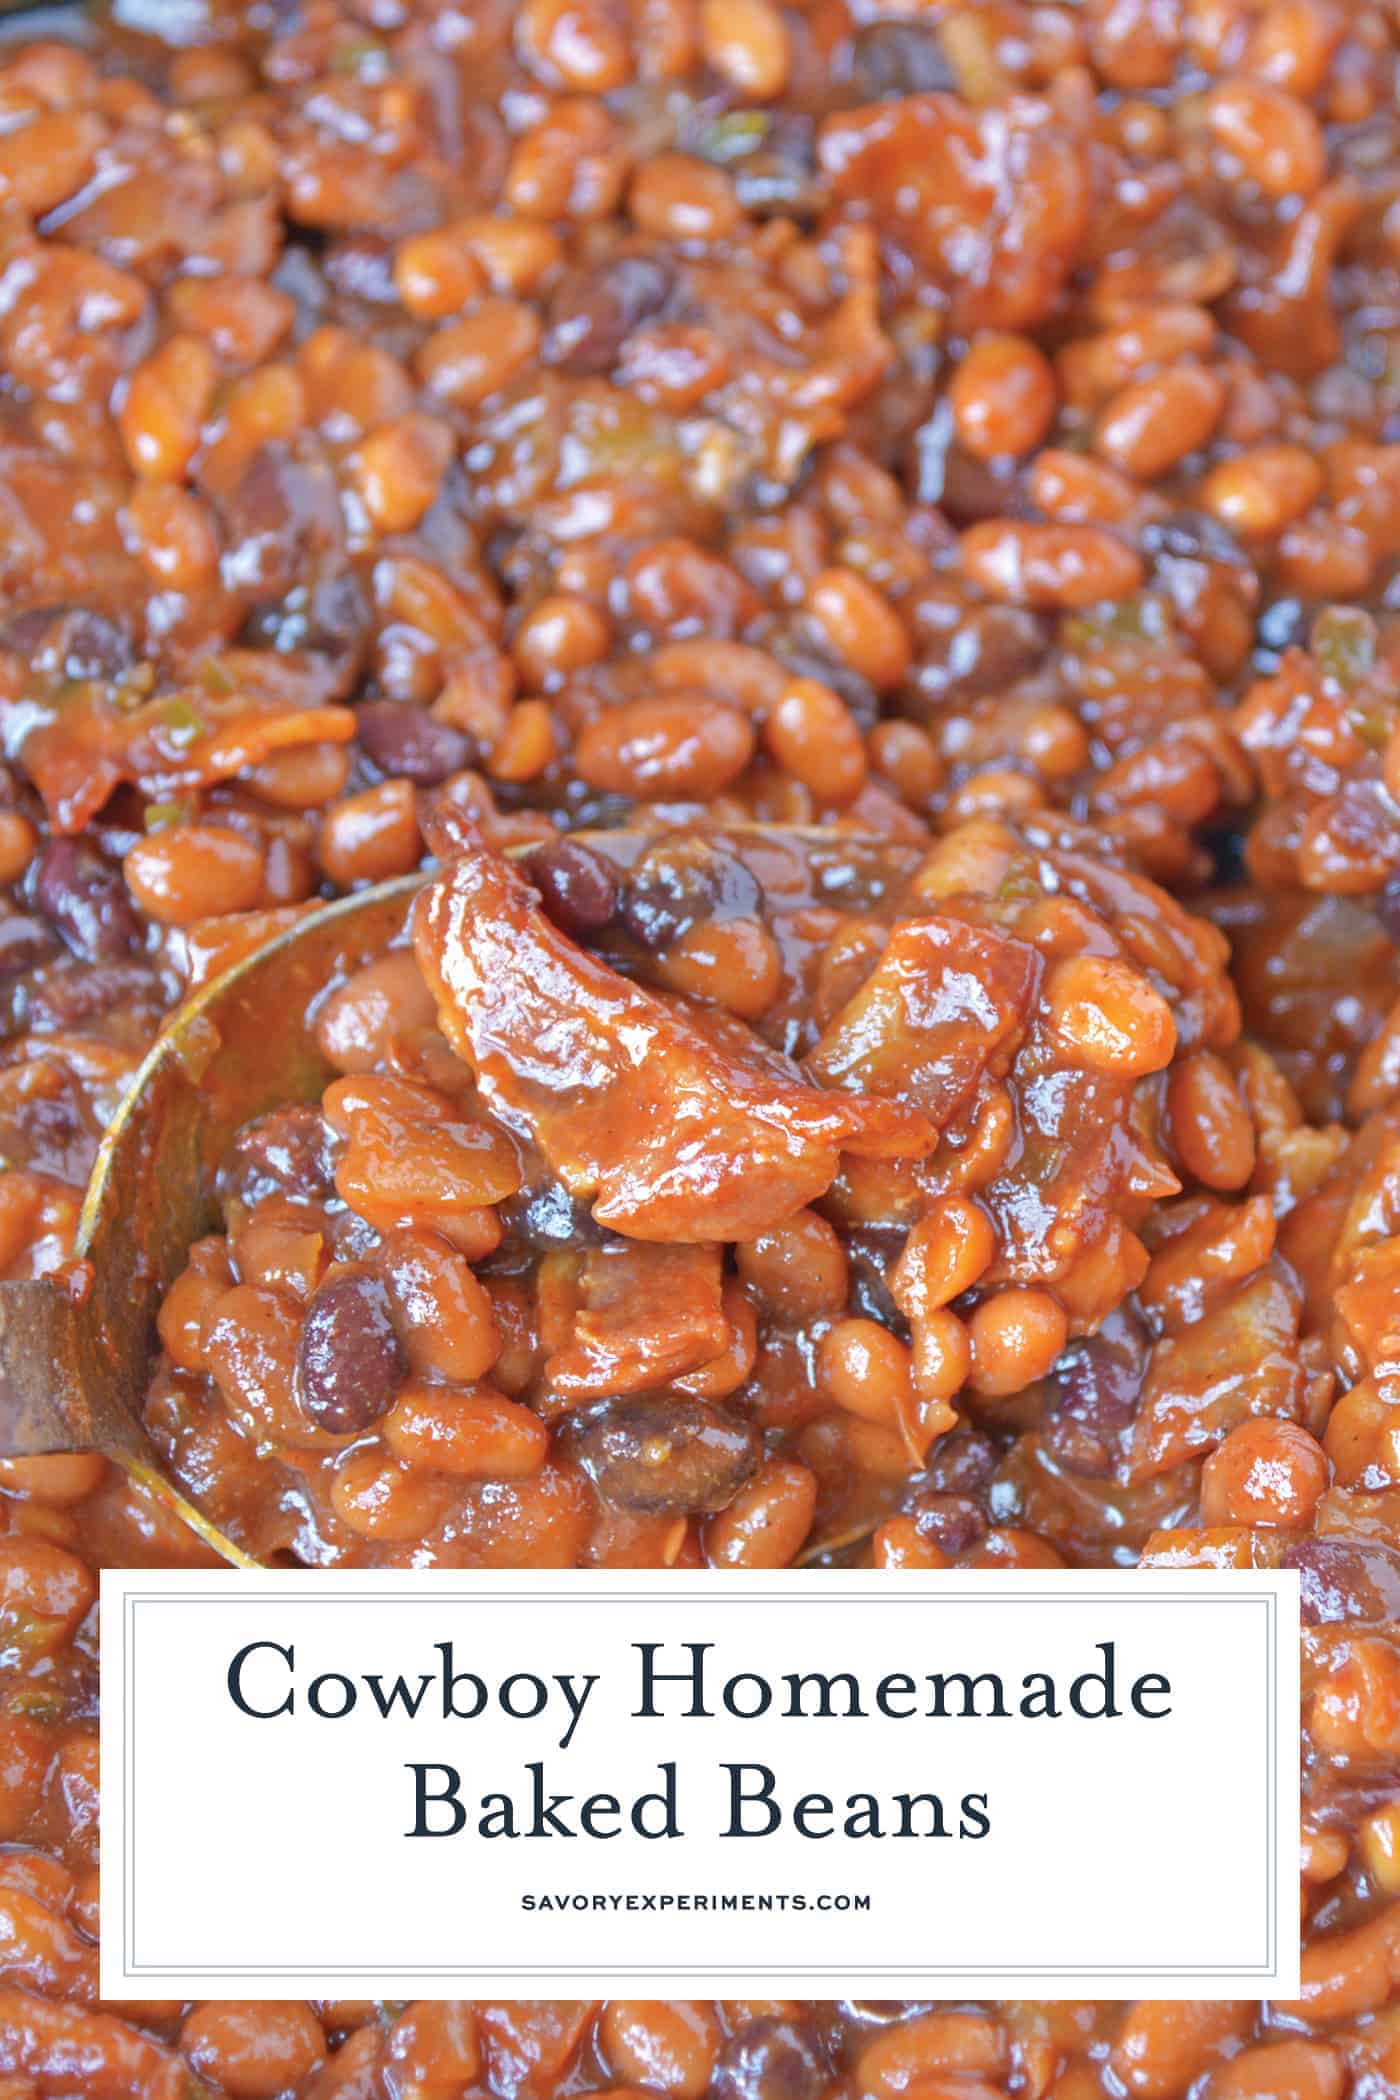 Cowboy Homemade Baked Beans - Baked Beans with Bacon!